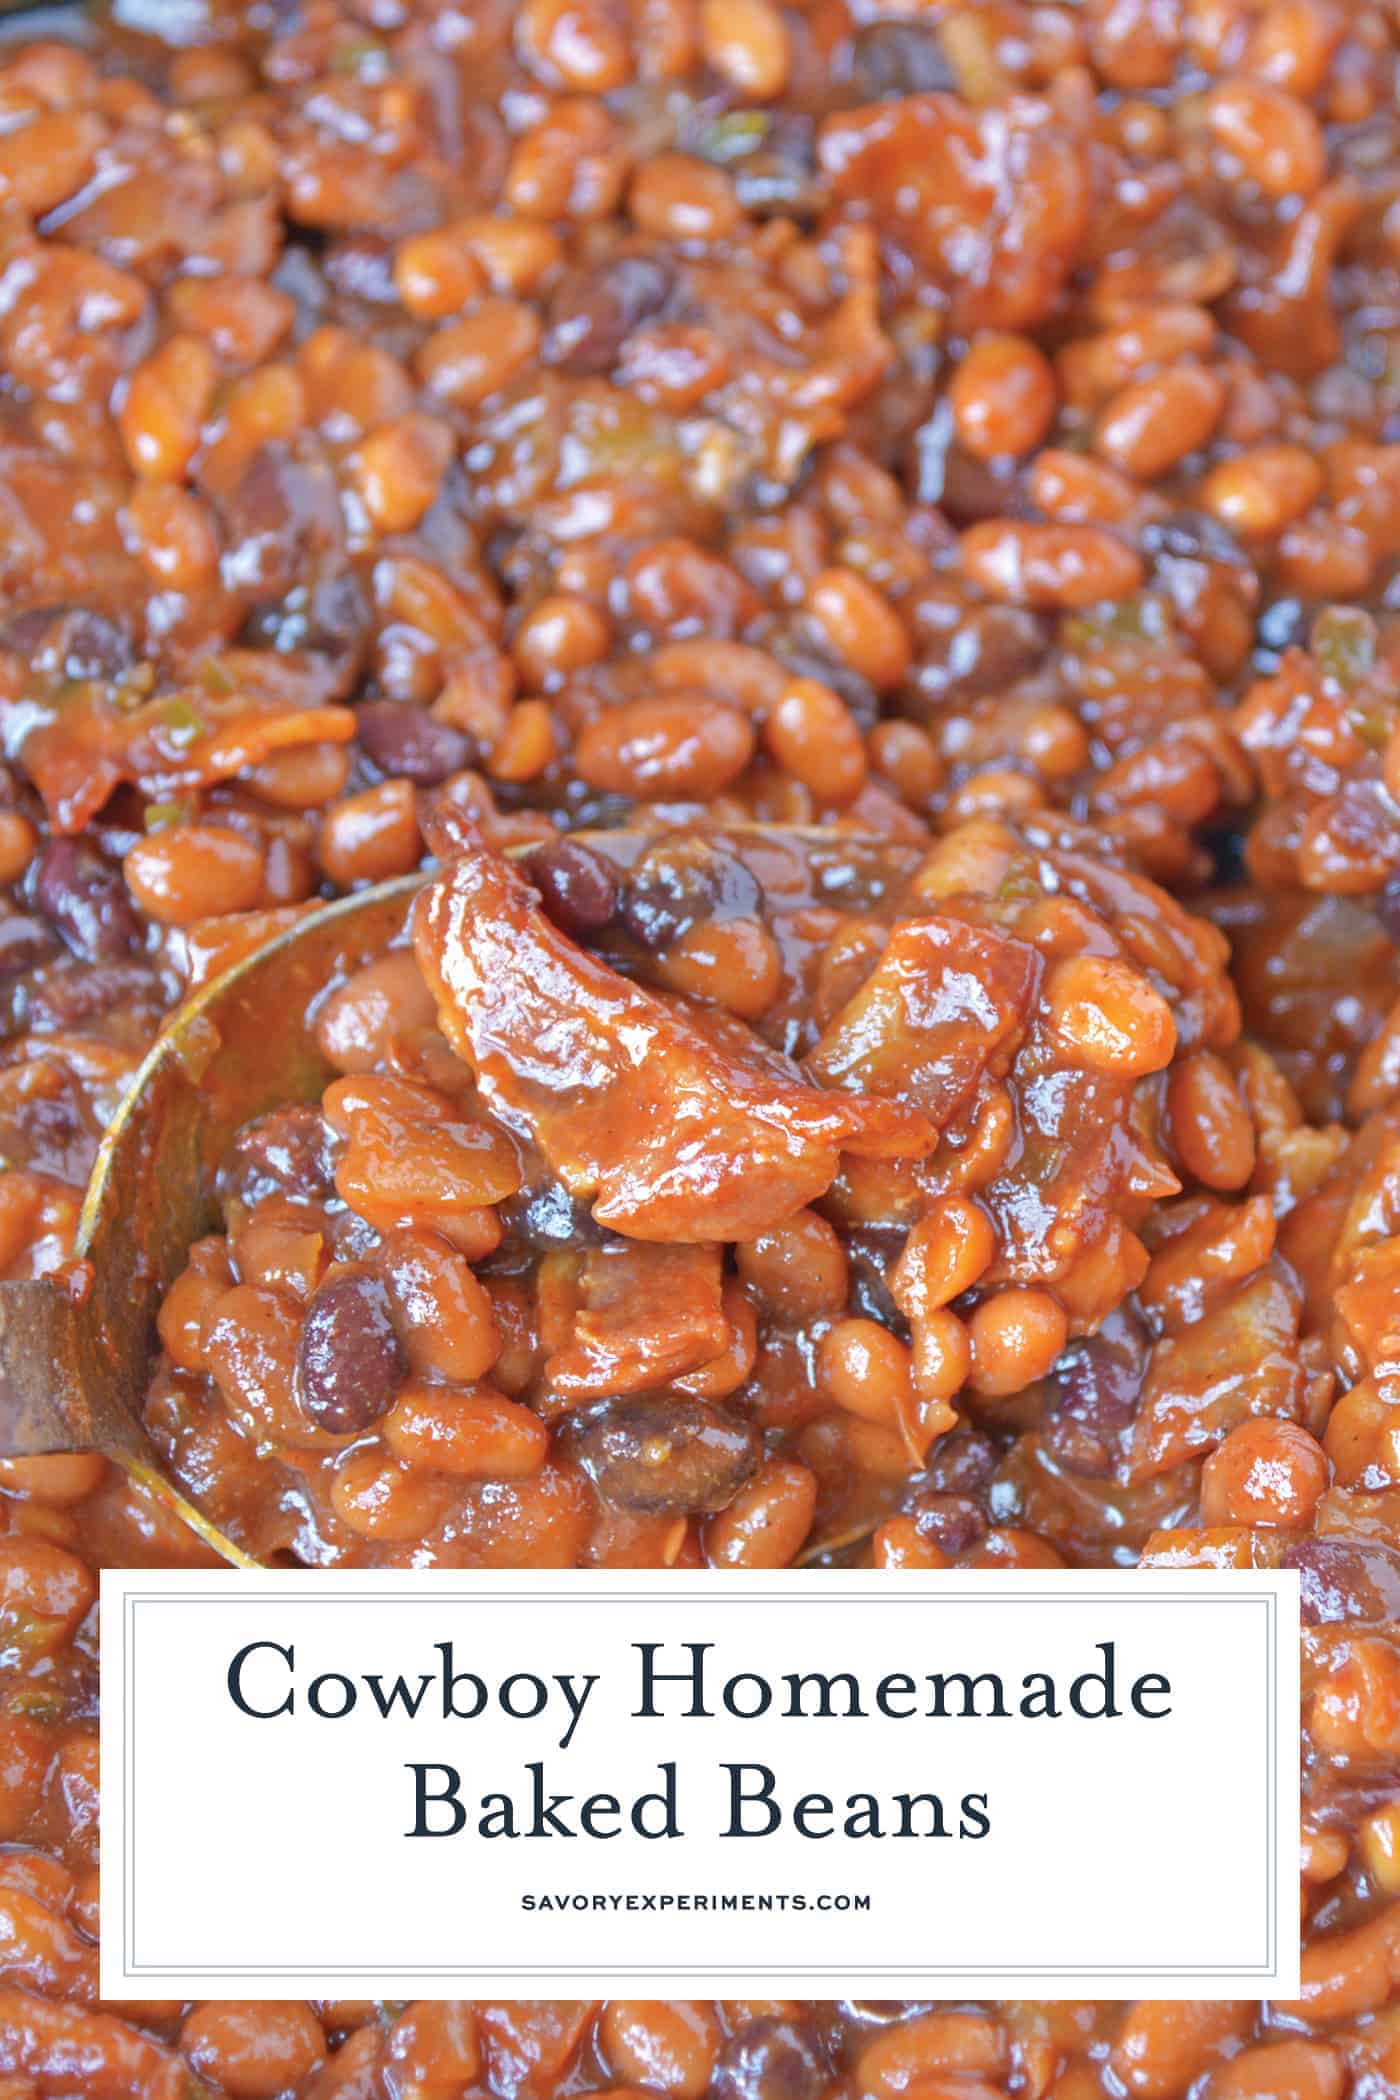 Cowboy Homemade Baked Beans - Baked Beans with Bacon!